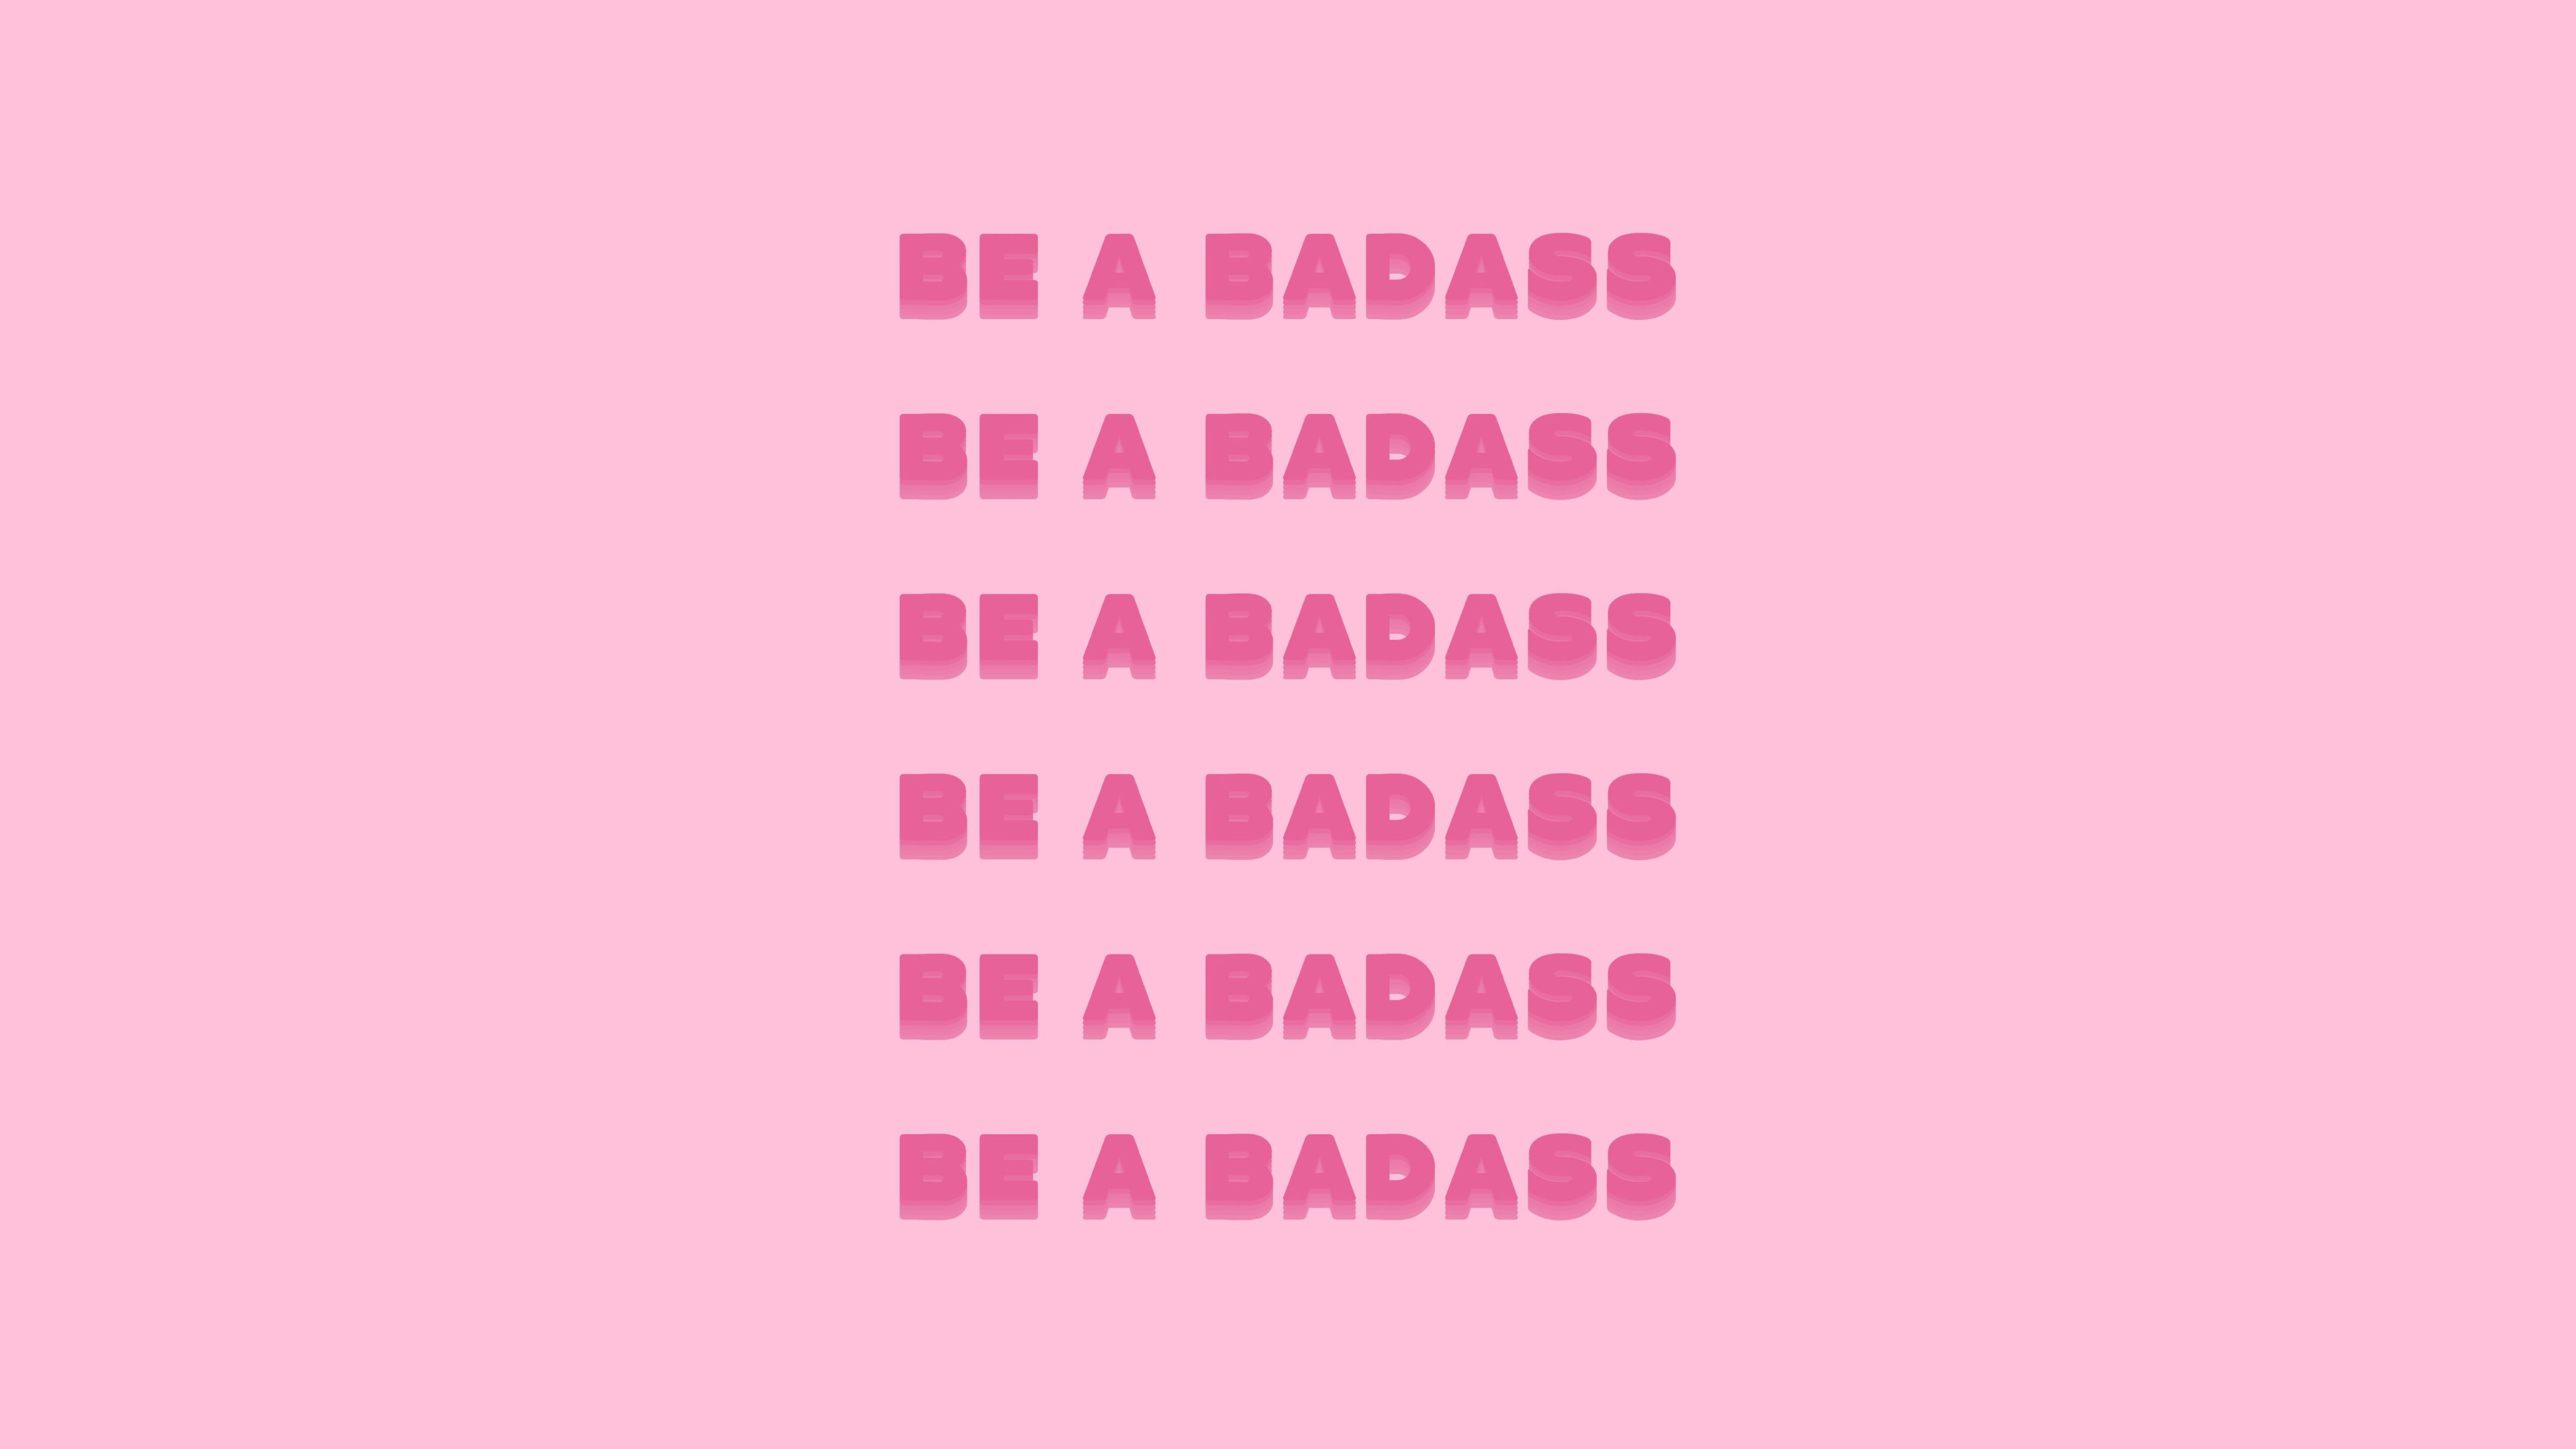 Baddie Quotes Wallpapers - Top Free Baddie Quotes Backgrounds ...